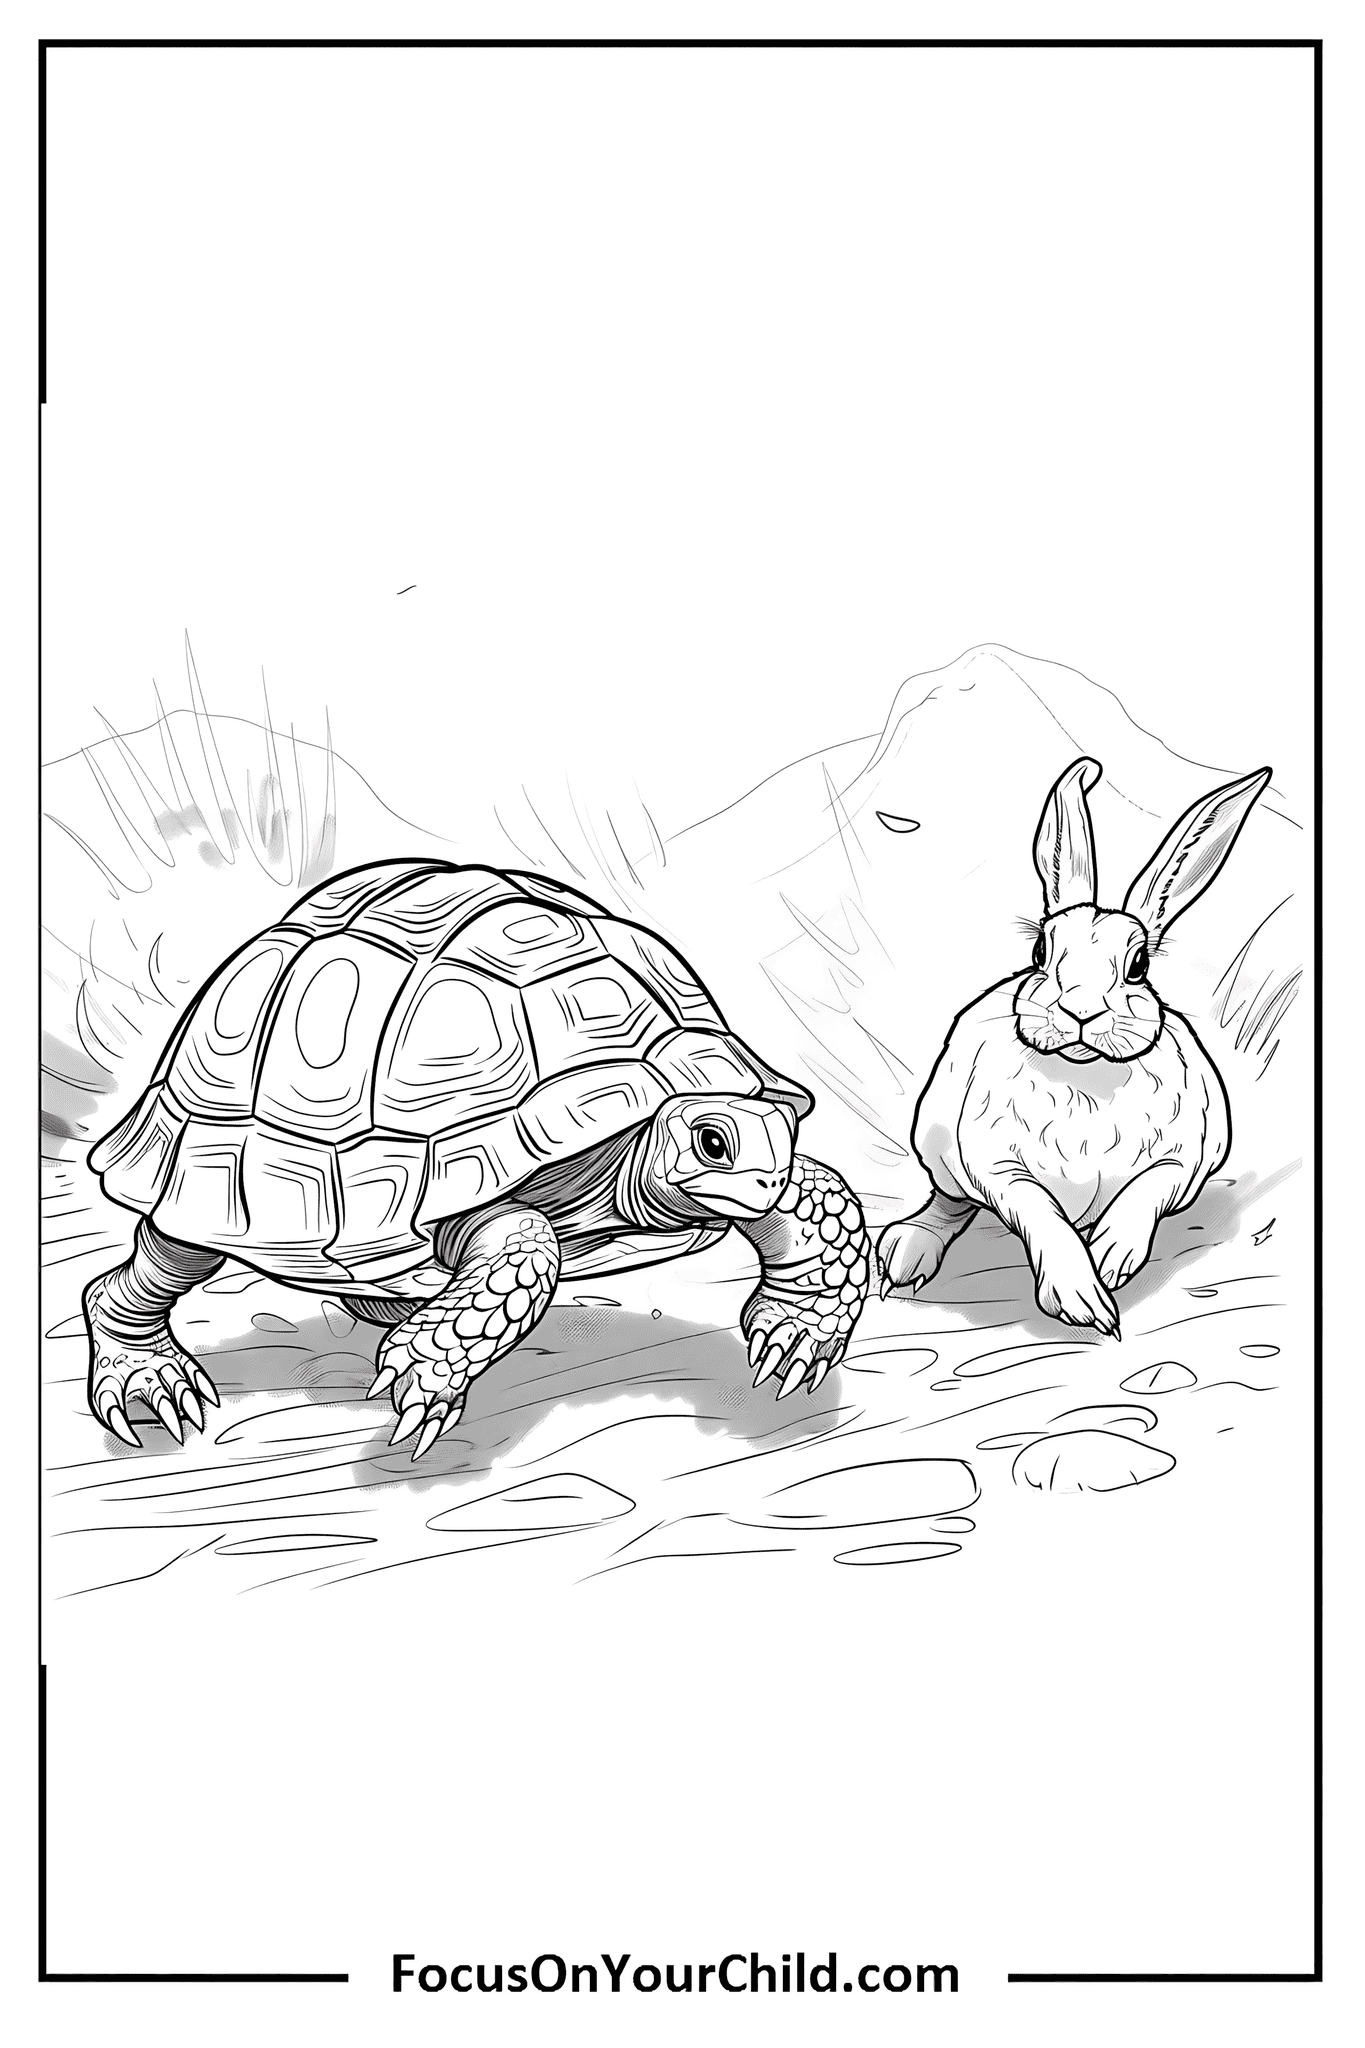 Detailed illustration of determined tortoise and relaxed hare in black and white.